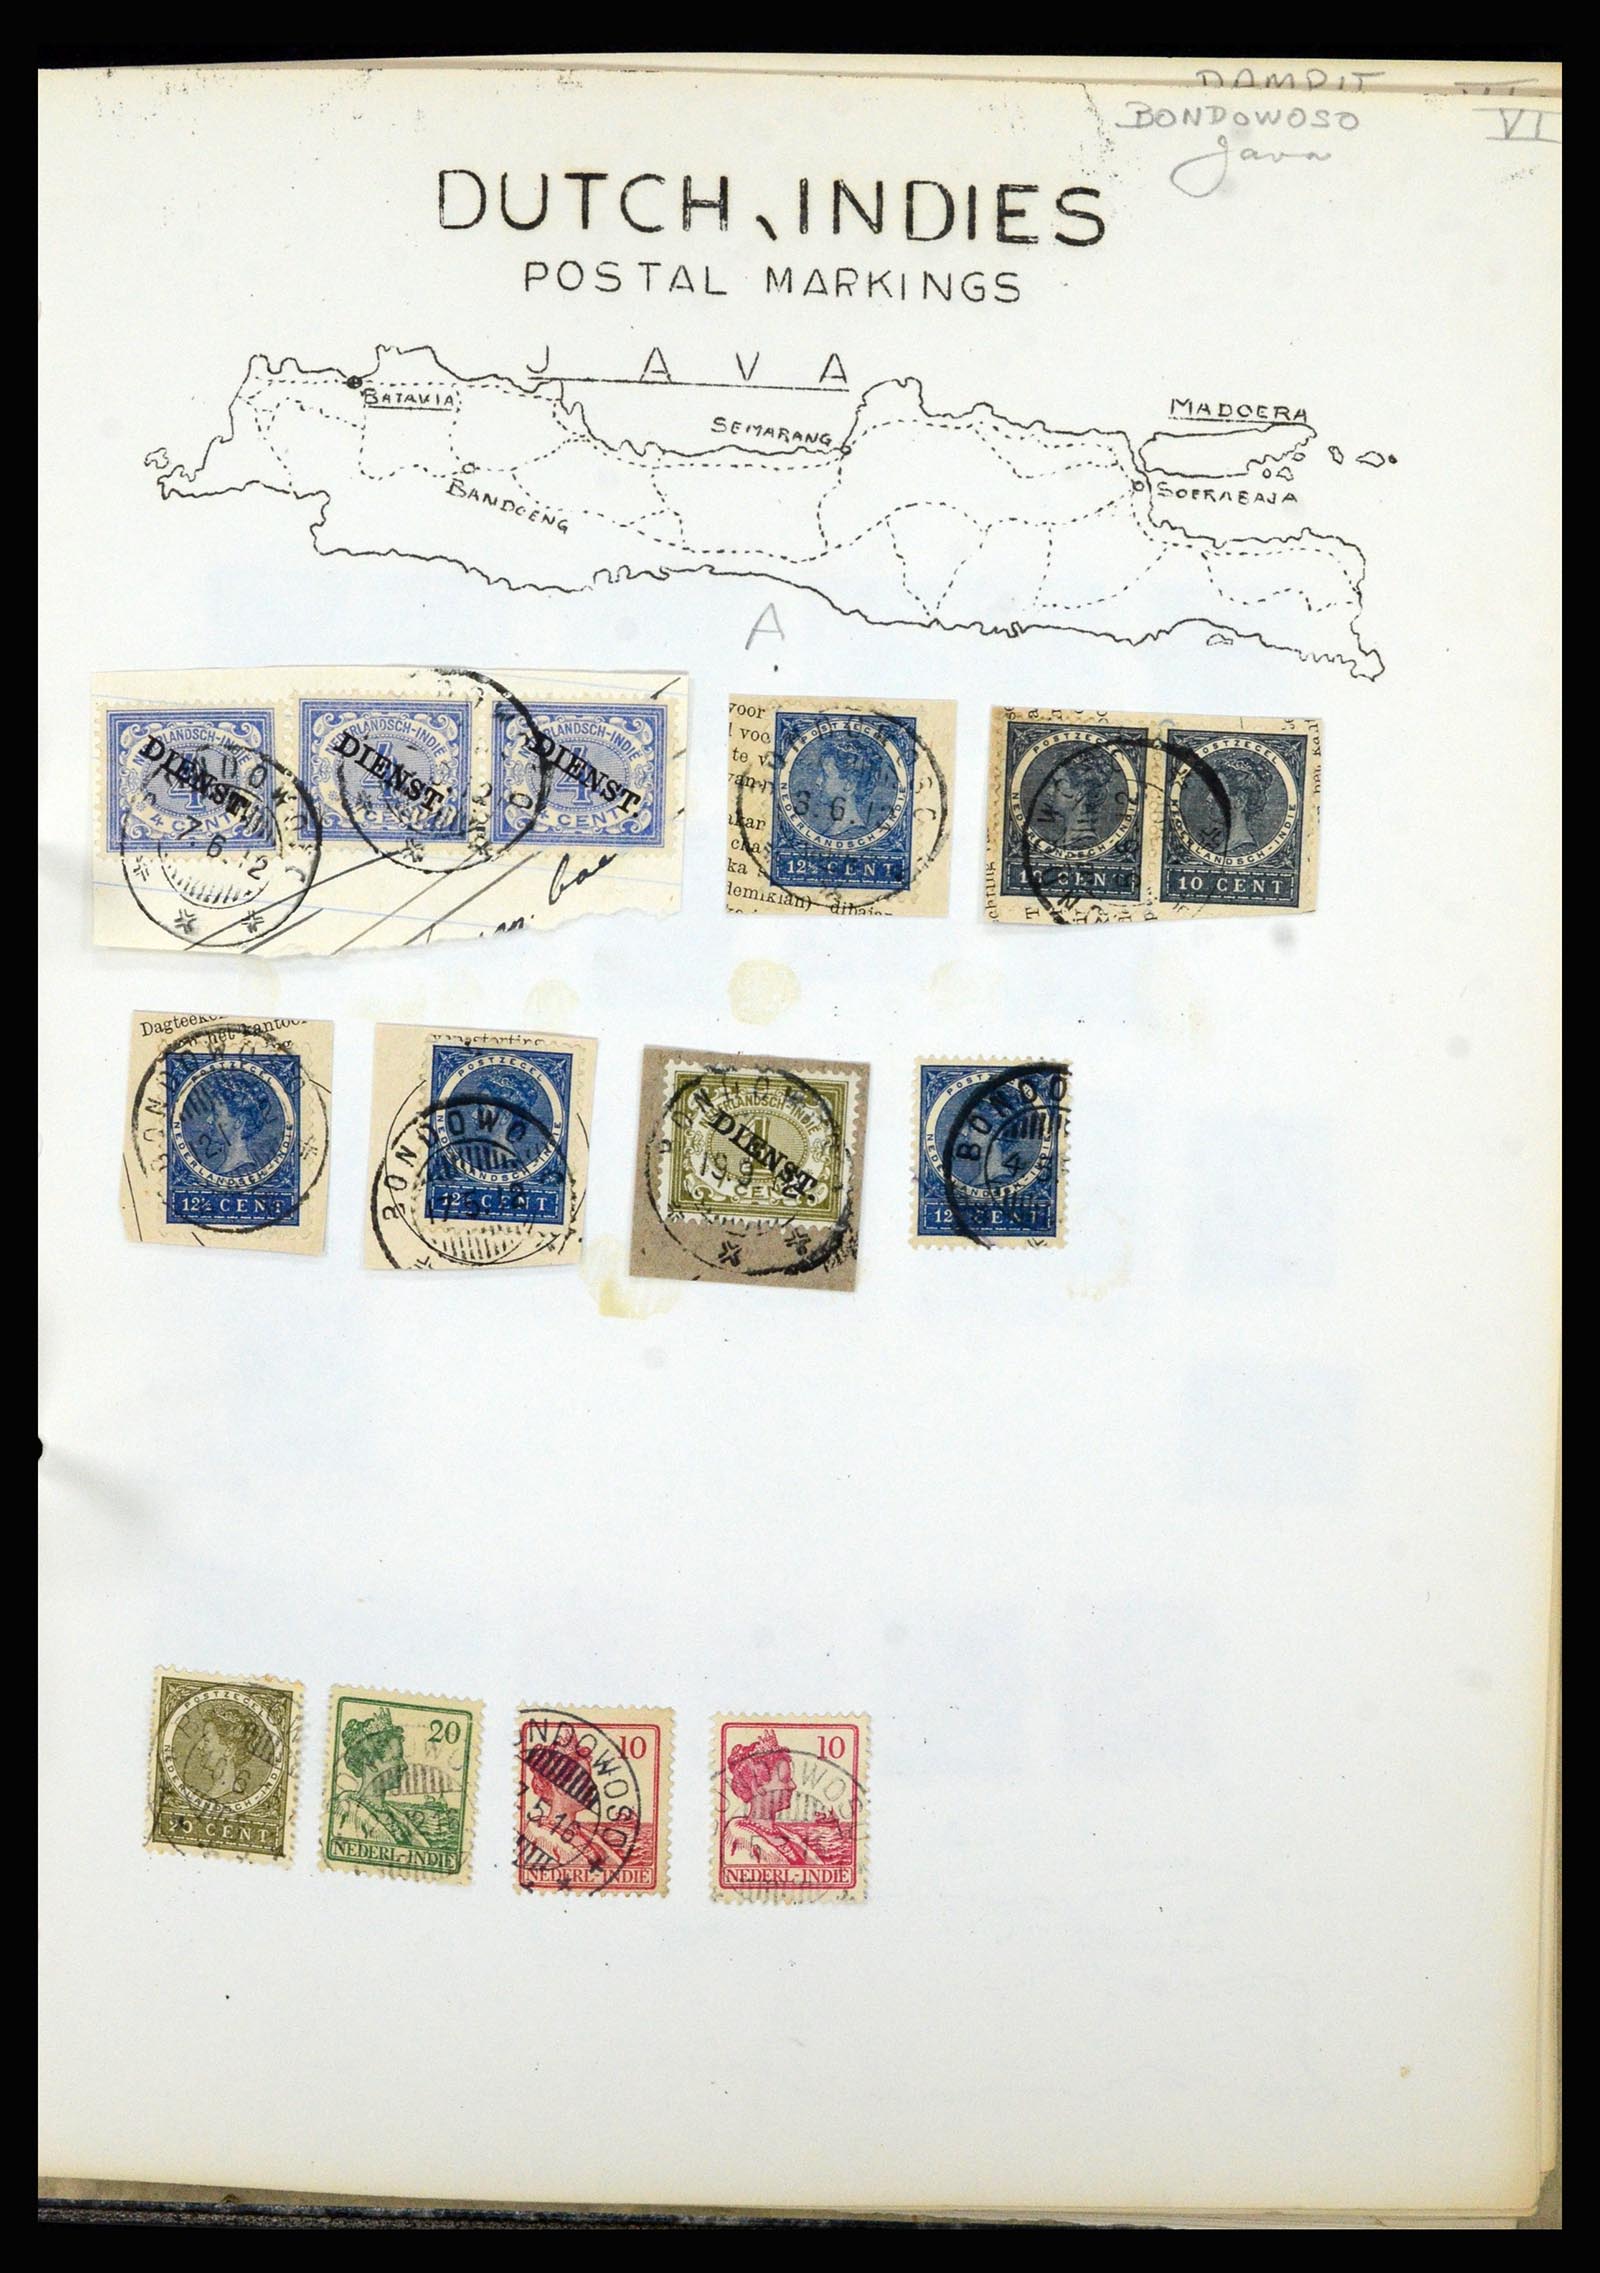 36841 024 - Stamp collection 36841 Dutch east Indies short bar cancels.